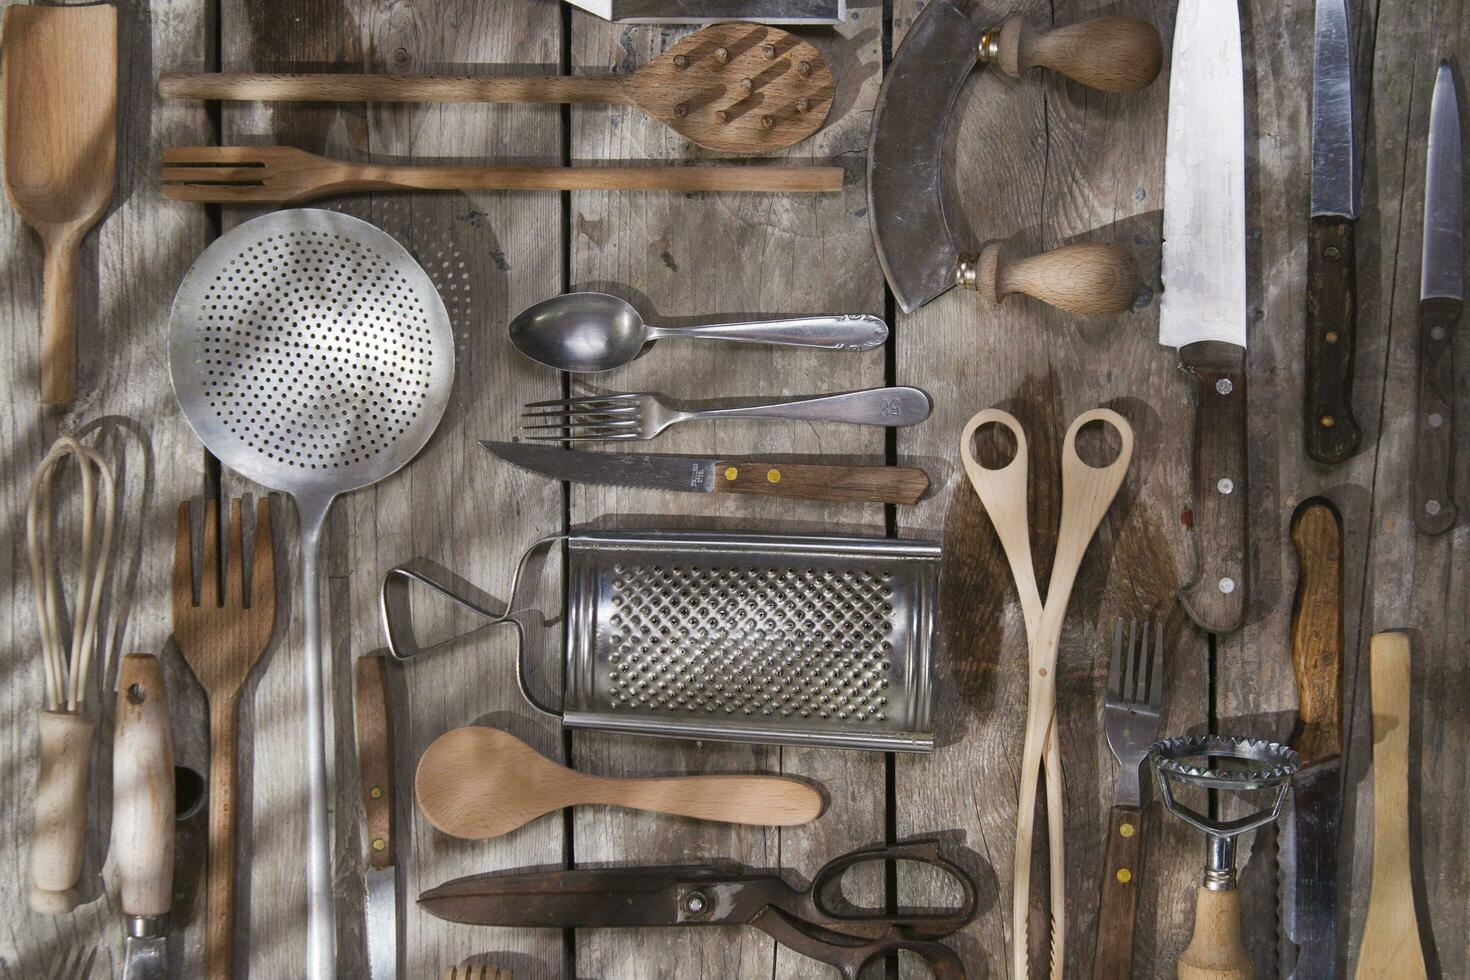 a bunch of different utensils on a table photo